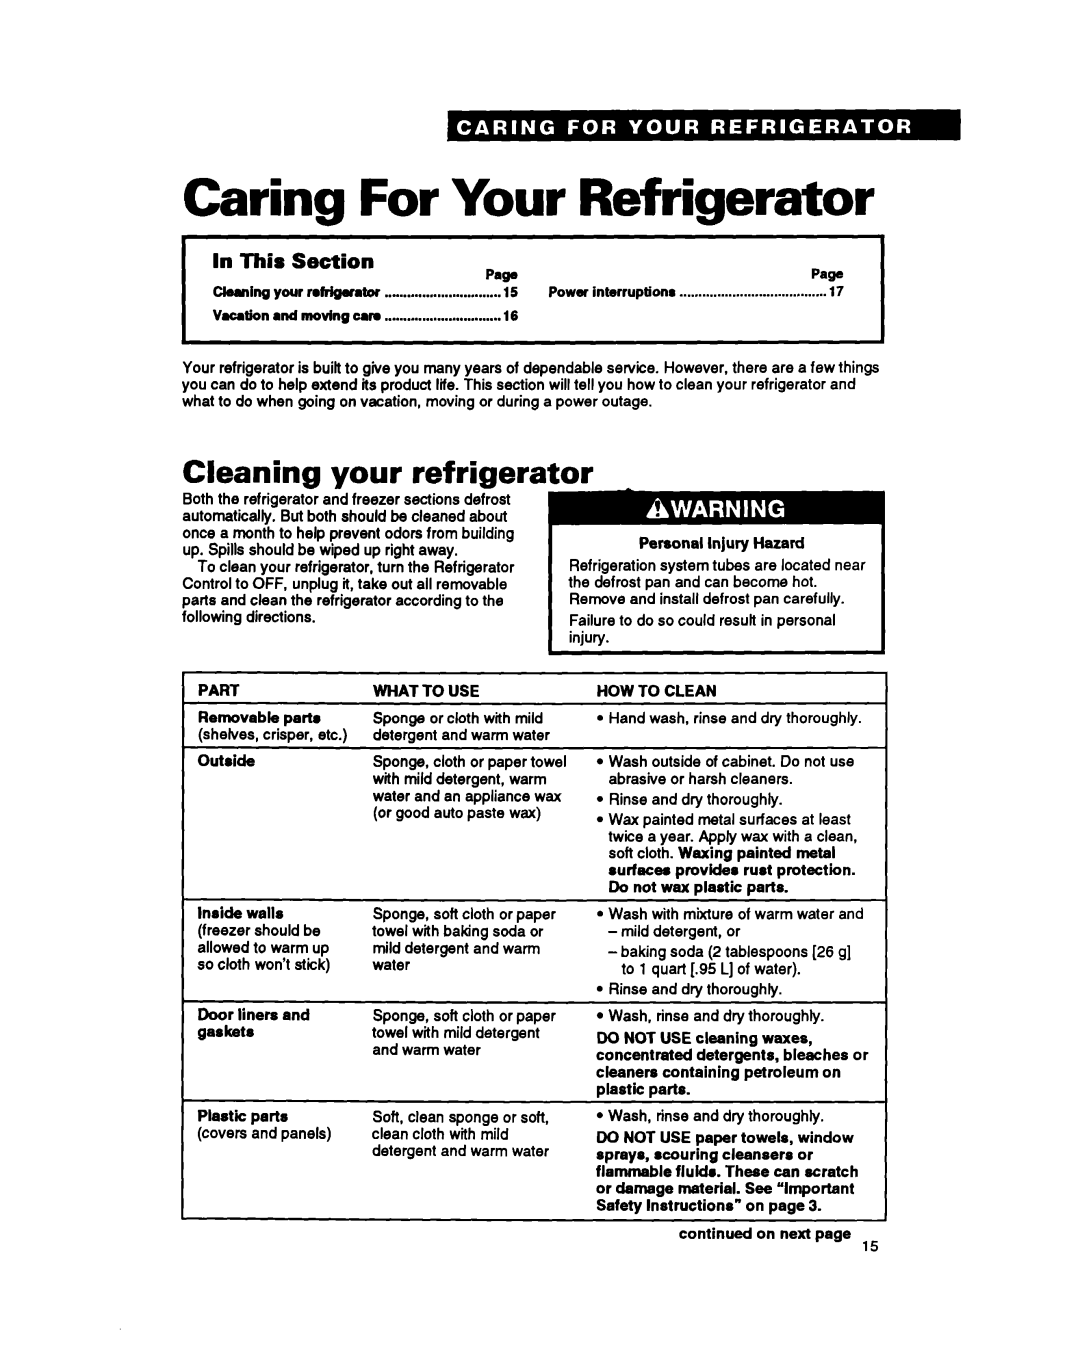 Whirlpool EB21DK warranty Caring For Your Refrigerator, your, Section, refrigerator, Cleaning, In This 